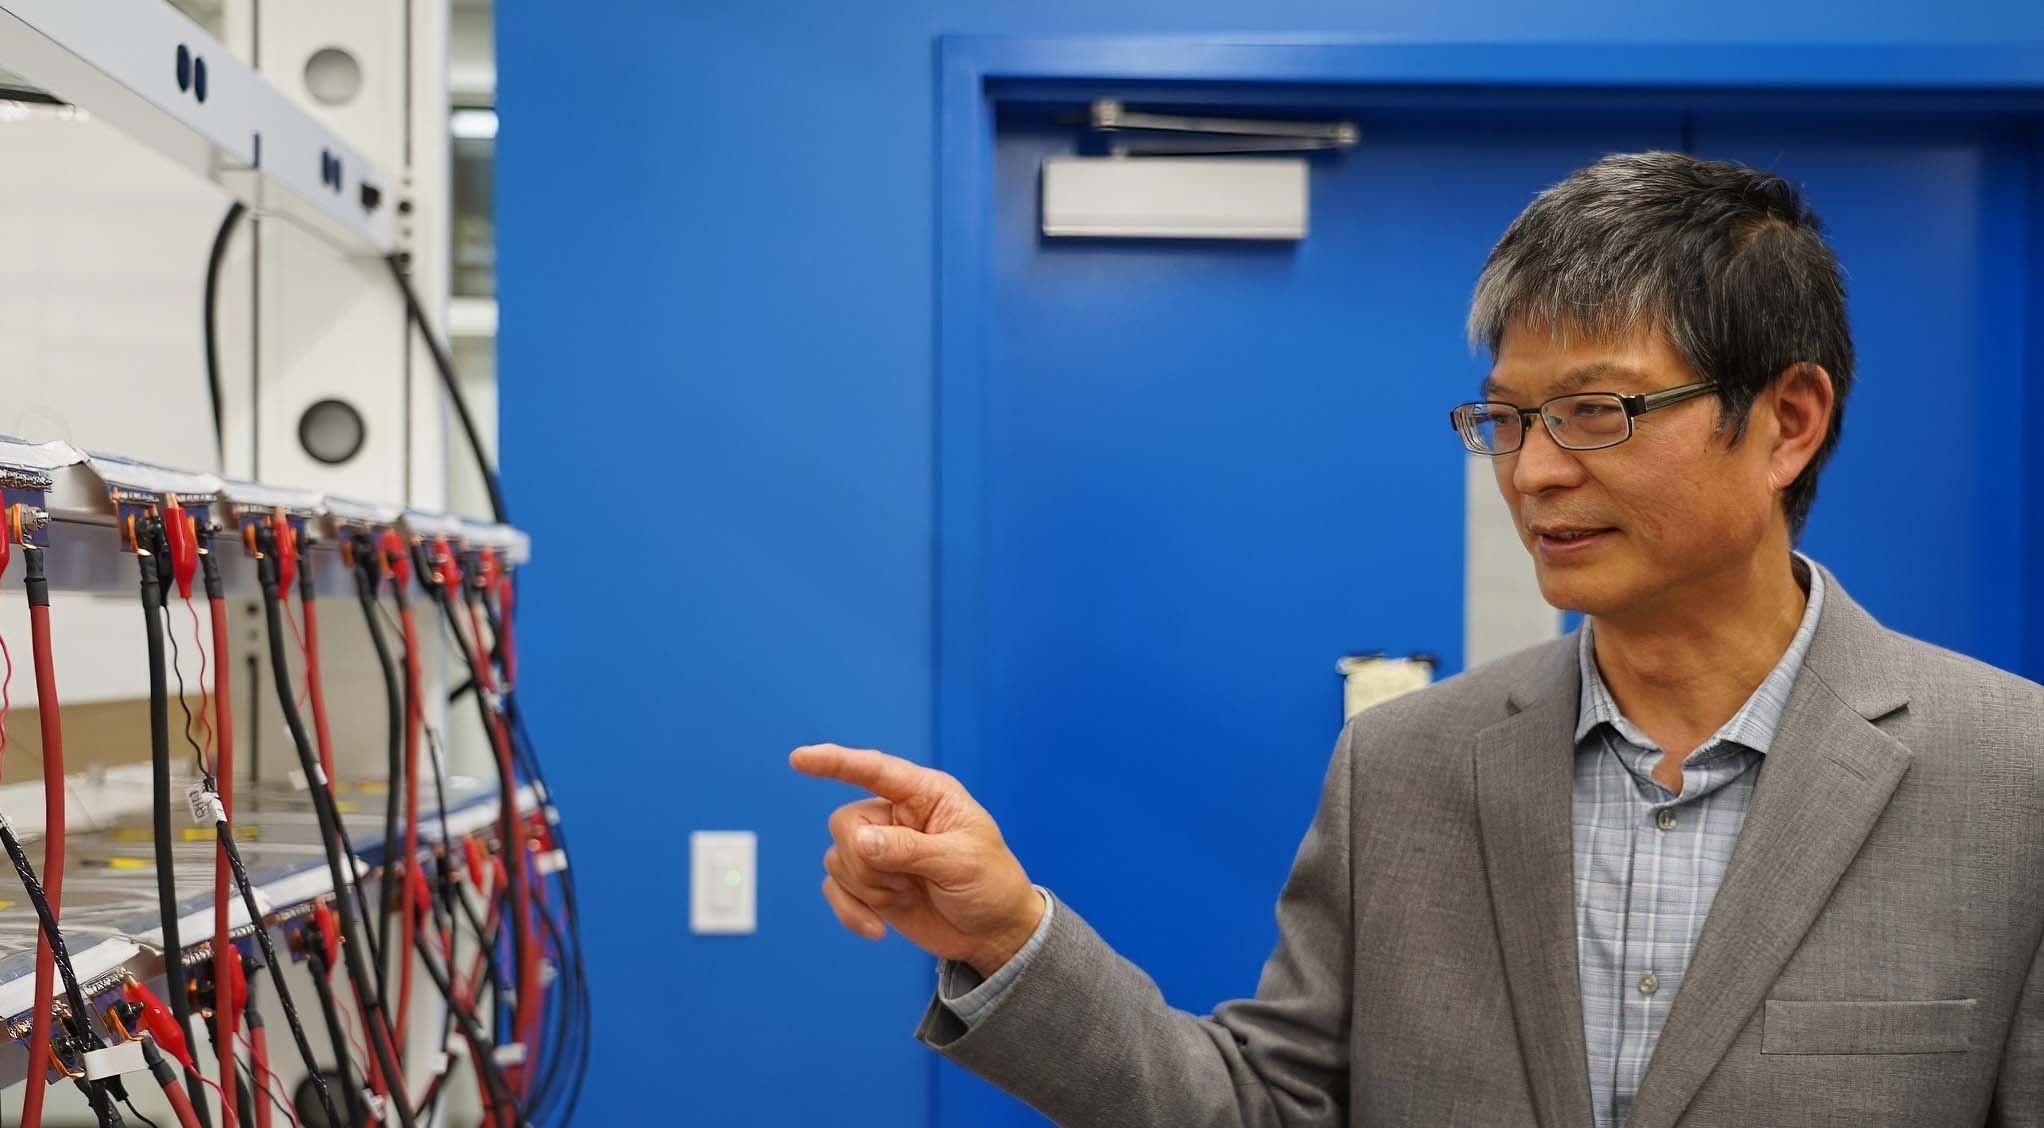 Electrical engineer Chris Mi pointed to cables leading to his lab's environmental testing chamber, which measures battery performance in different temperature conditions. (Photo: Christopher Leap)